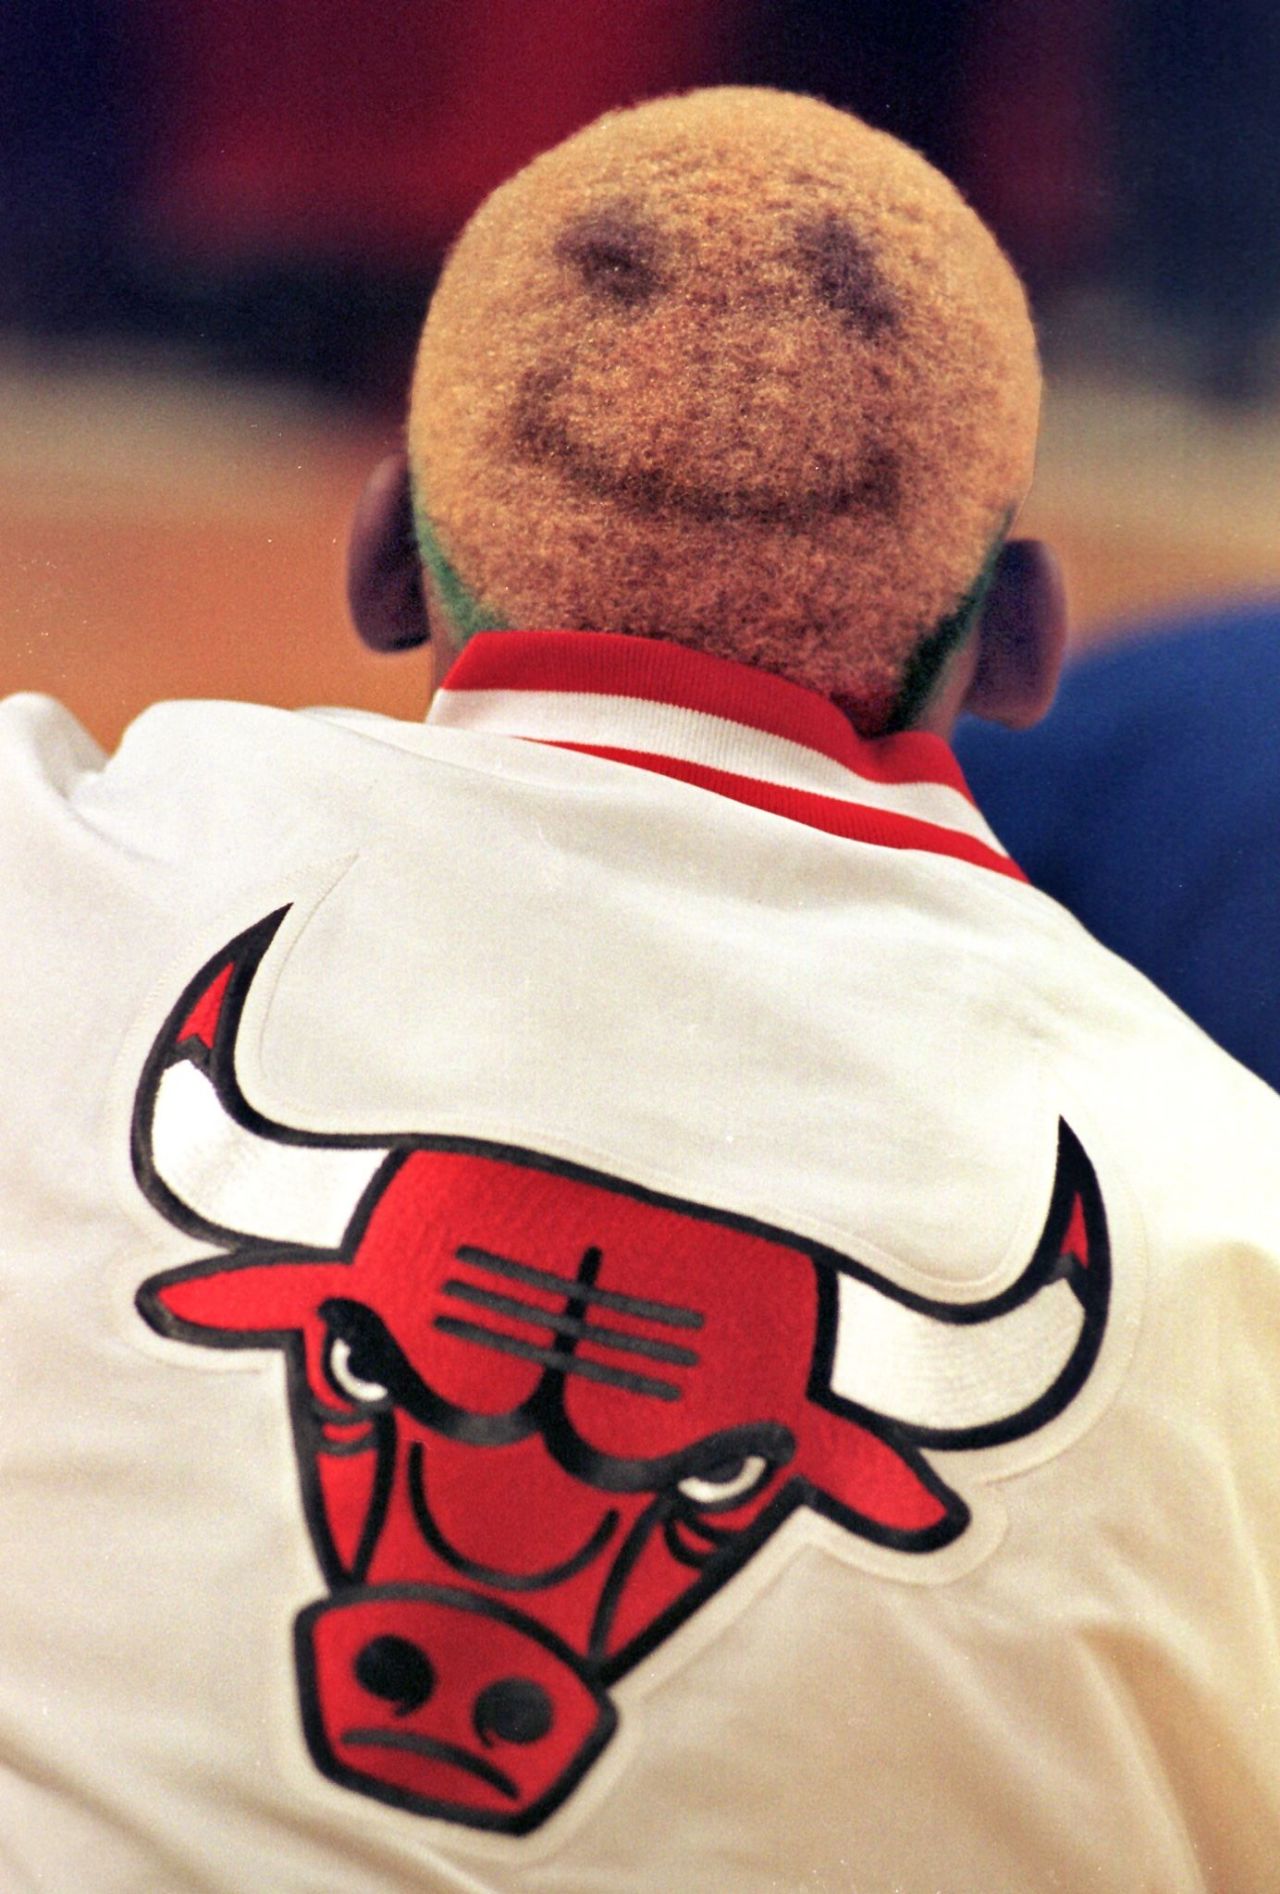 Dennis Rodman was an NBA fashion pioneer, starting with his tattoos, piercings and colorful hair -- which took shape in the early 1990s, and evolved throughout the decade.  